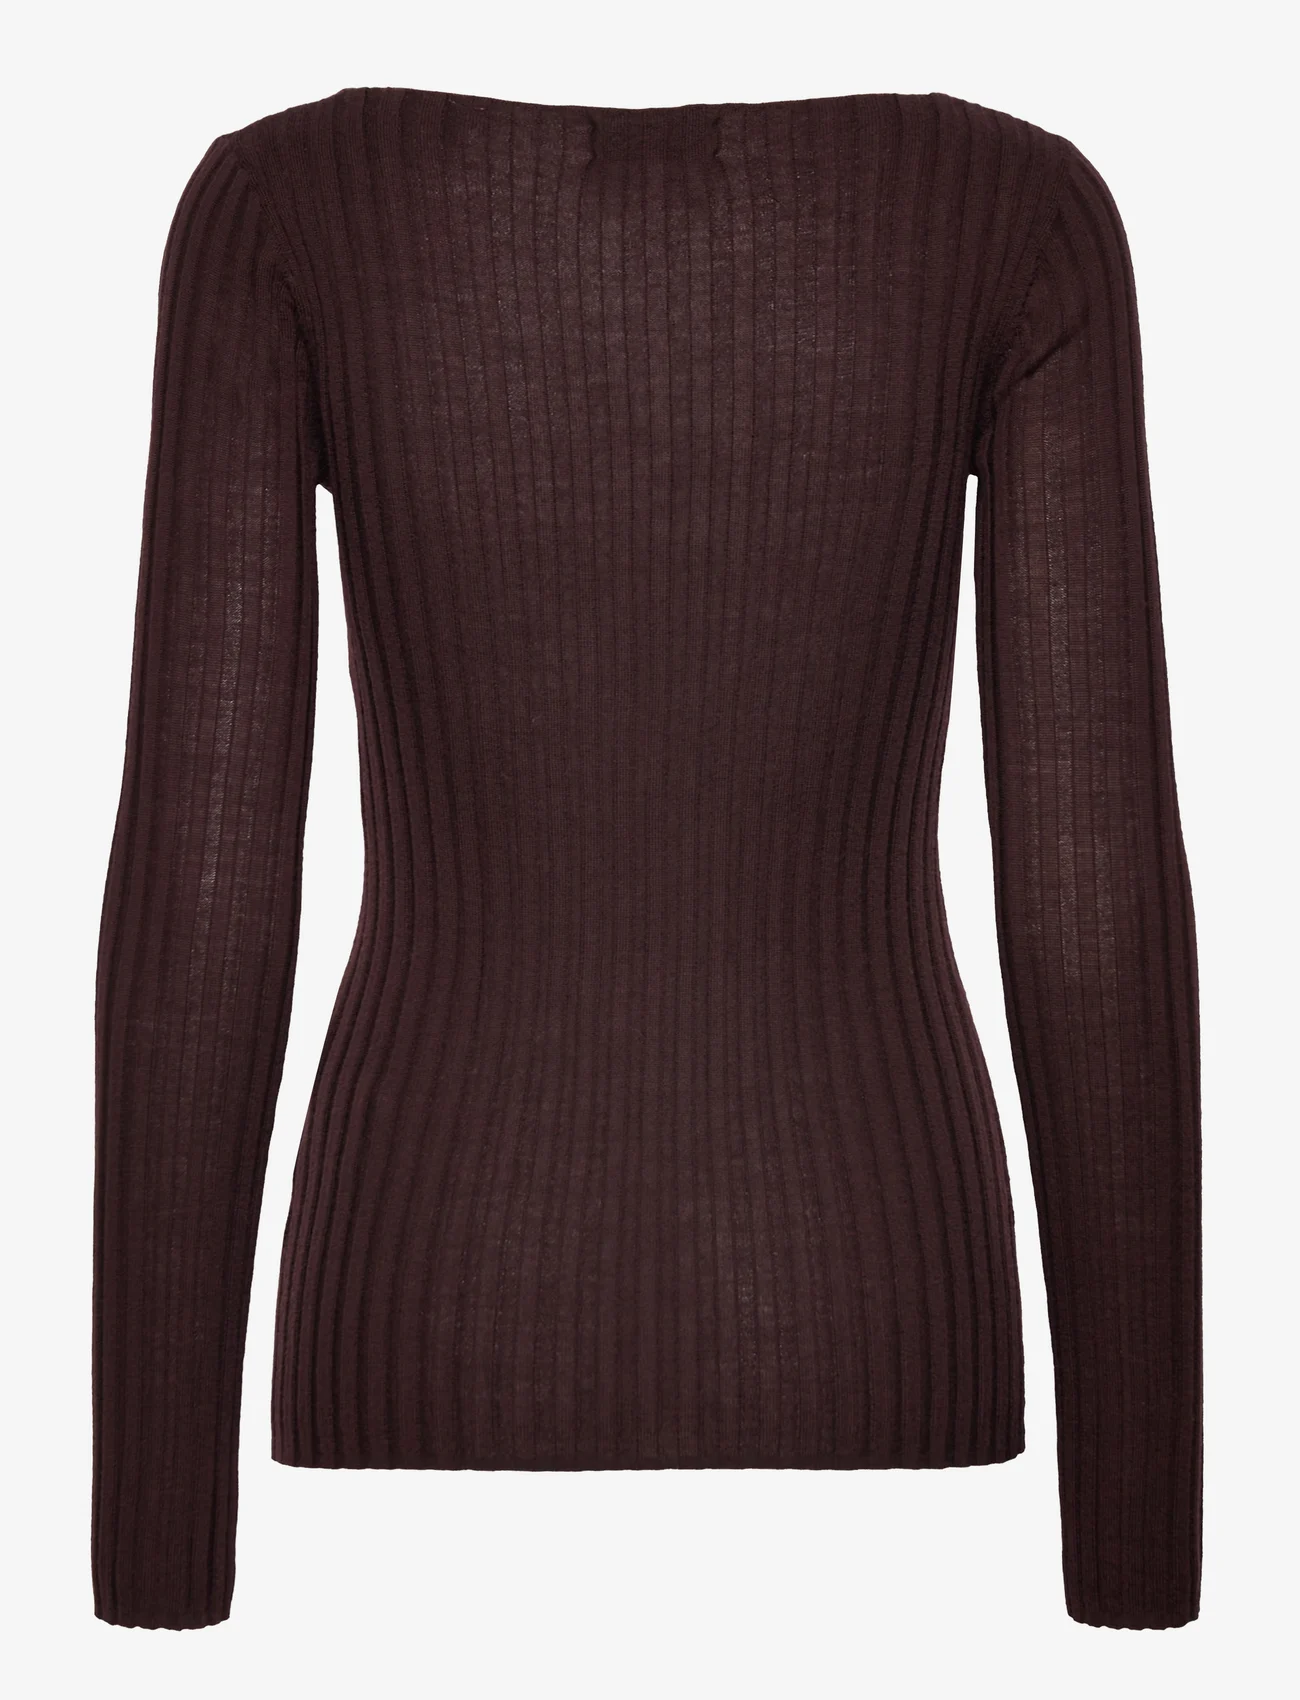 House Of Dagmar - Monique Top - long-sleeved tops - cacao - 1